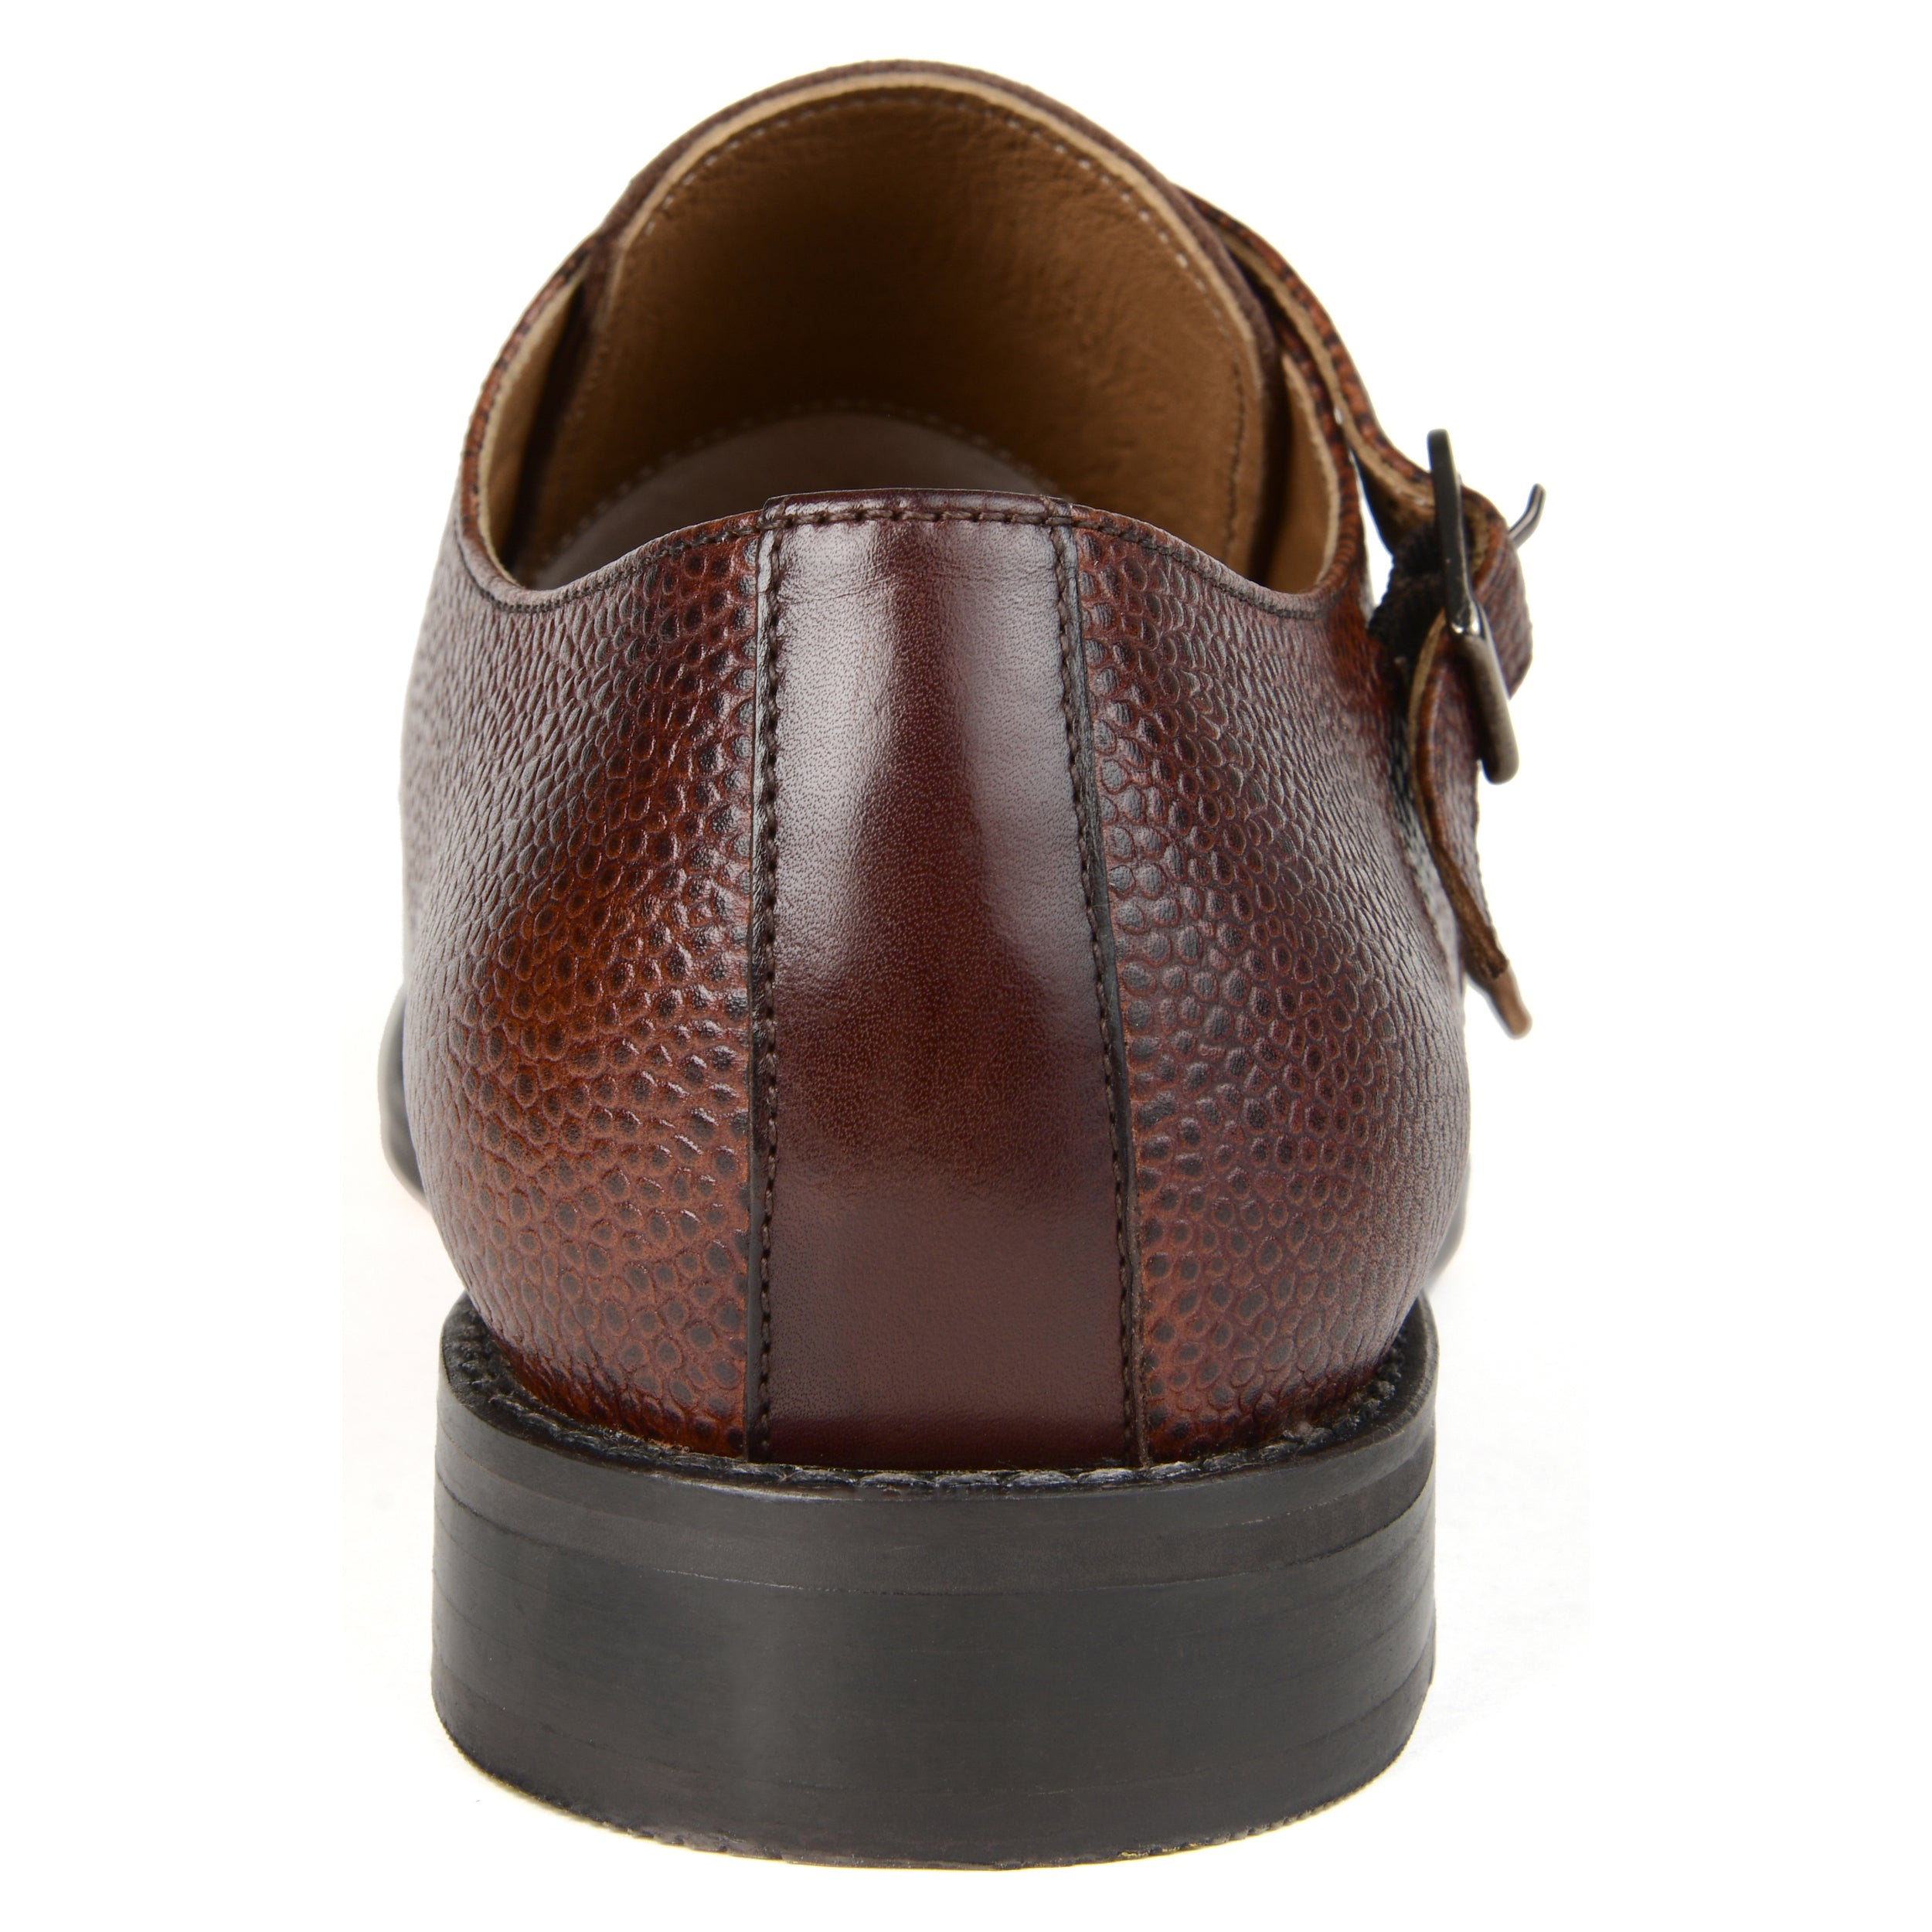 Brown Double Monk Strap Shoes for Men by